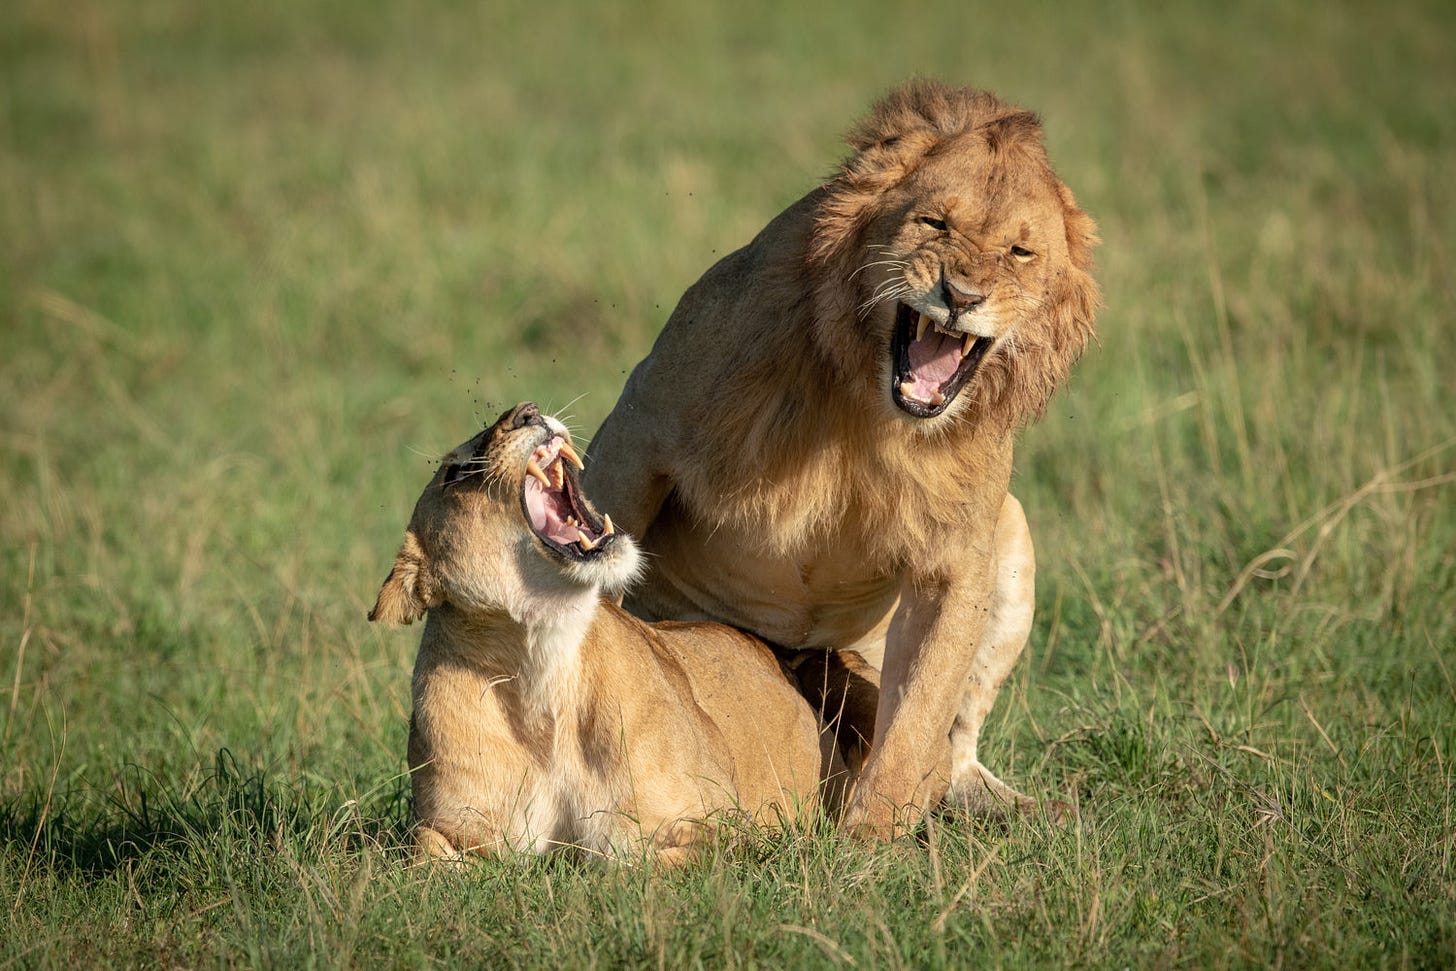 One can only imagine what these lions are shouting at each other…!